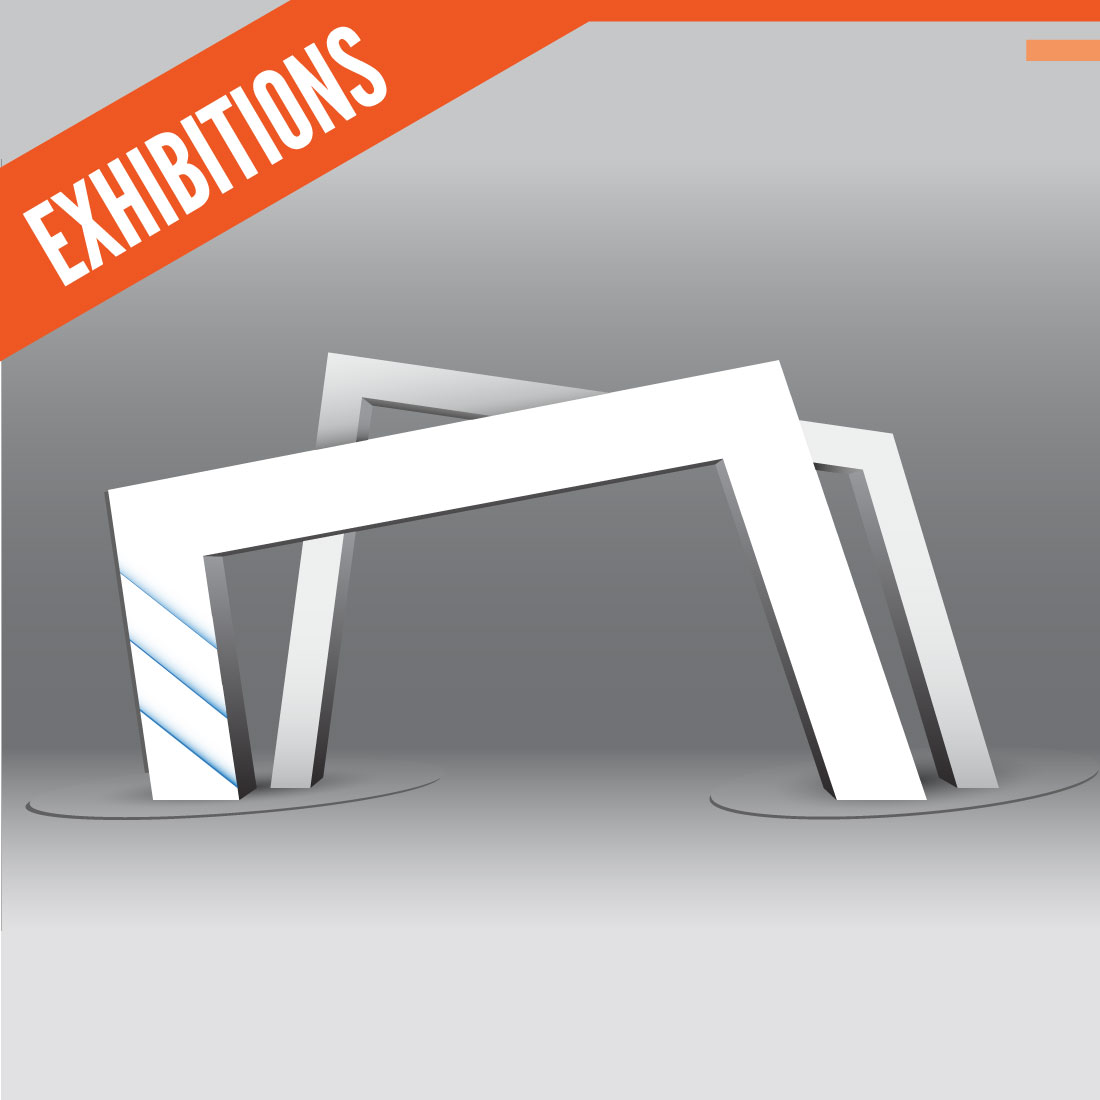 Exhibitions-Feature